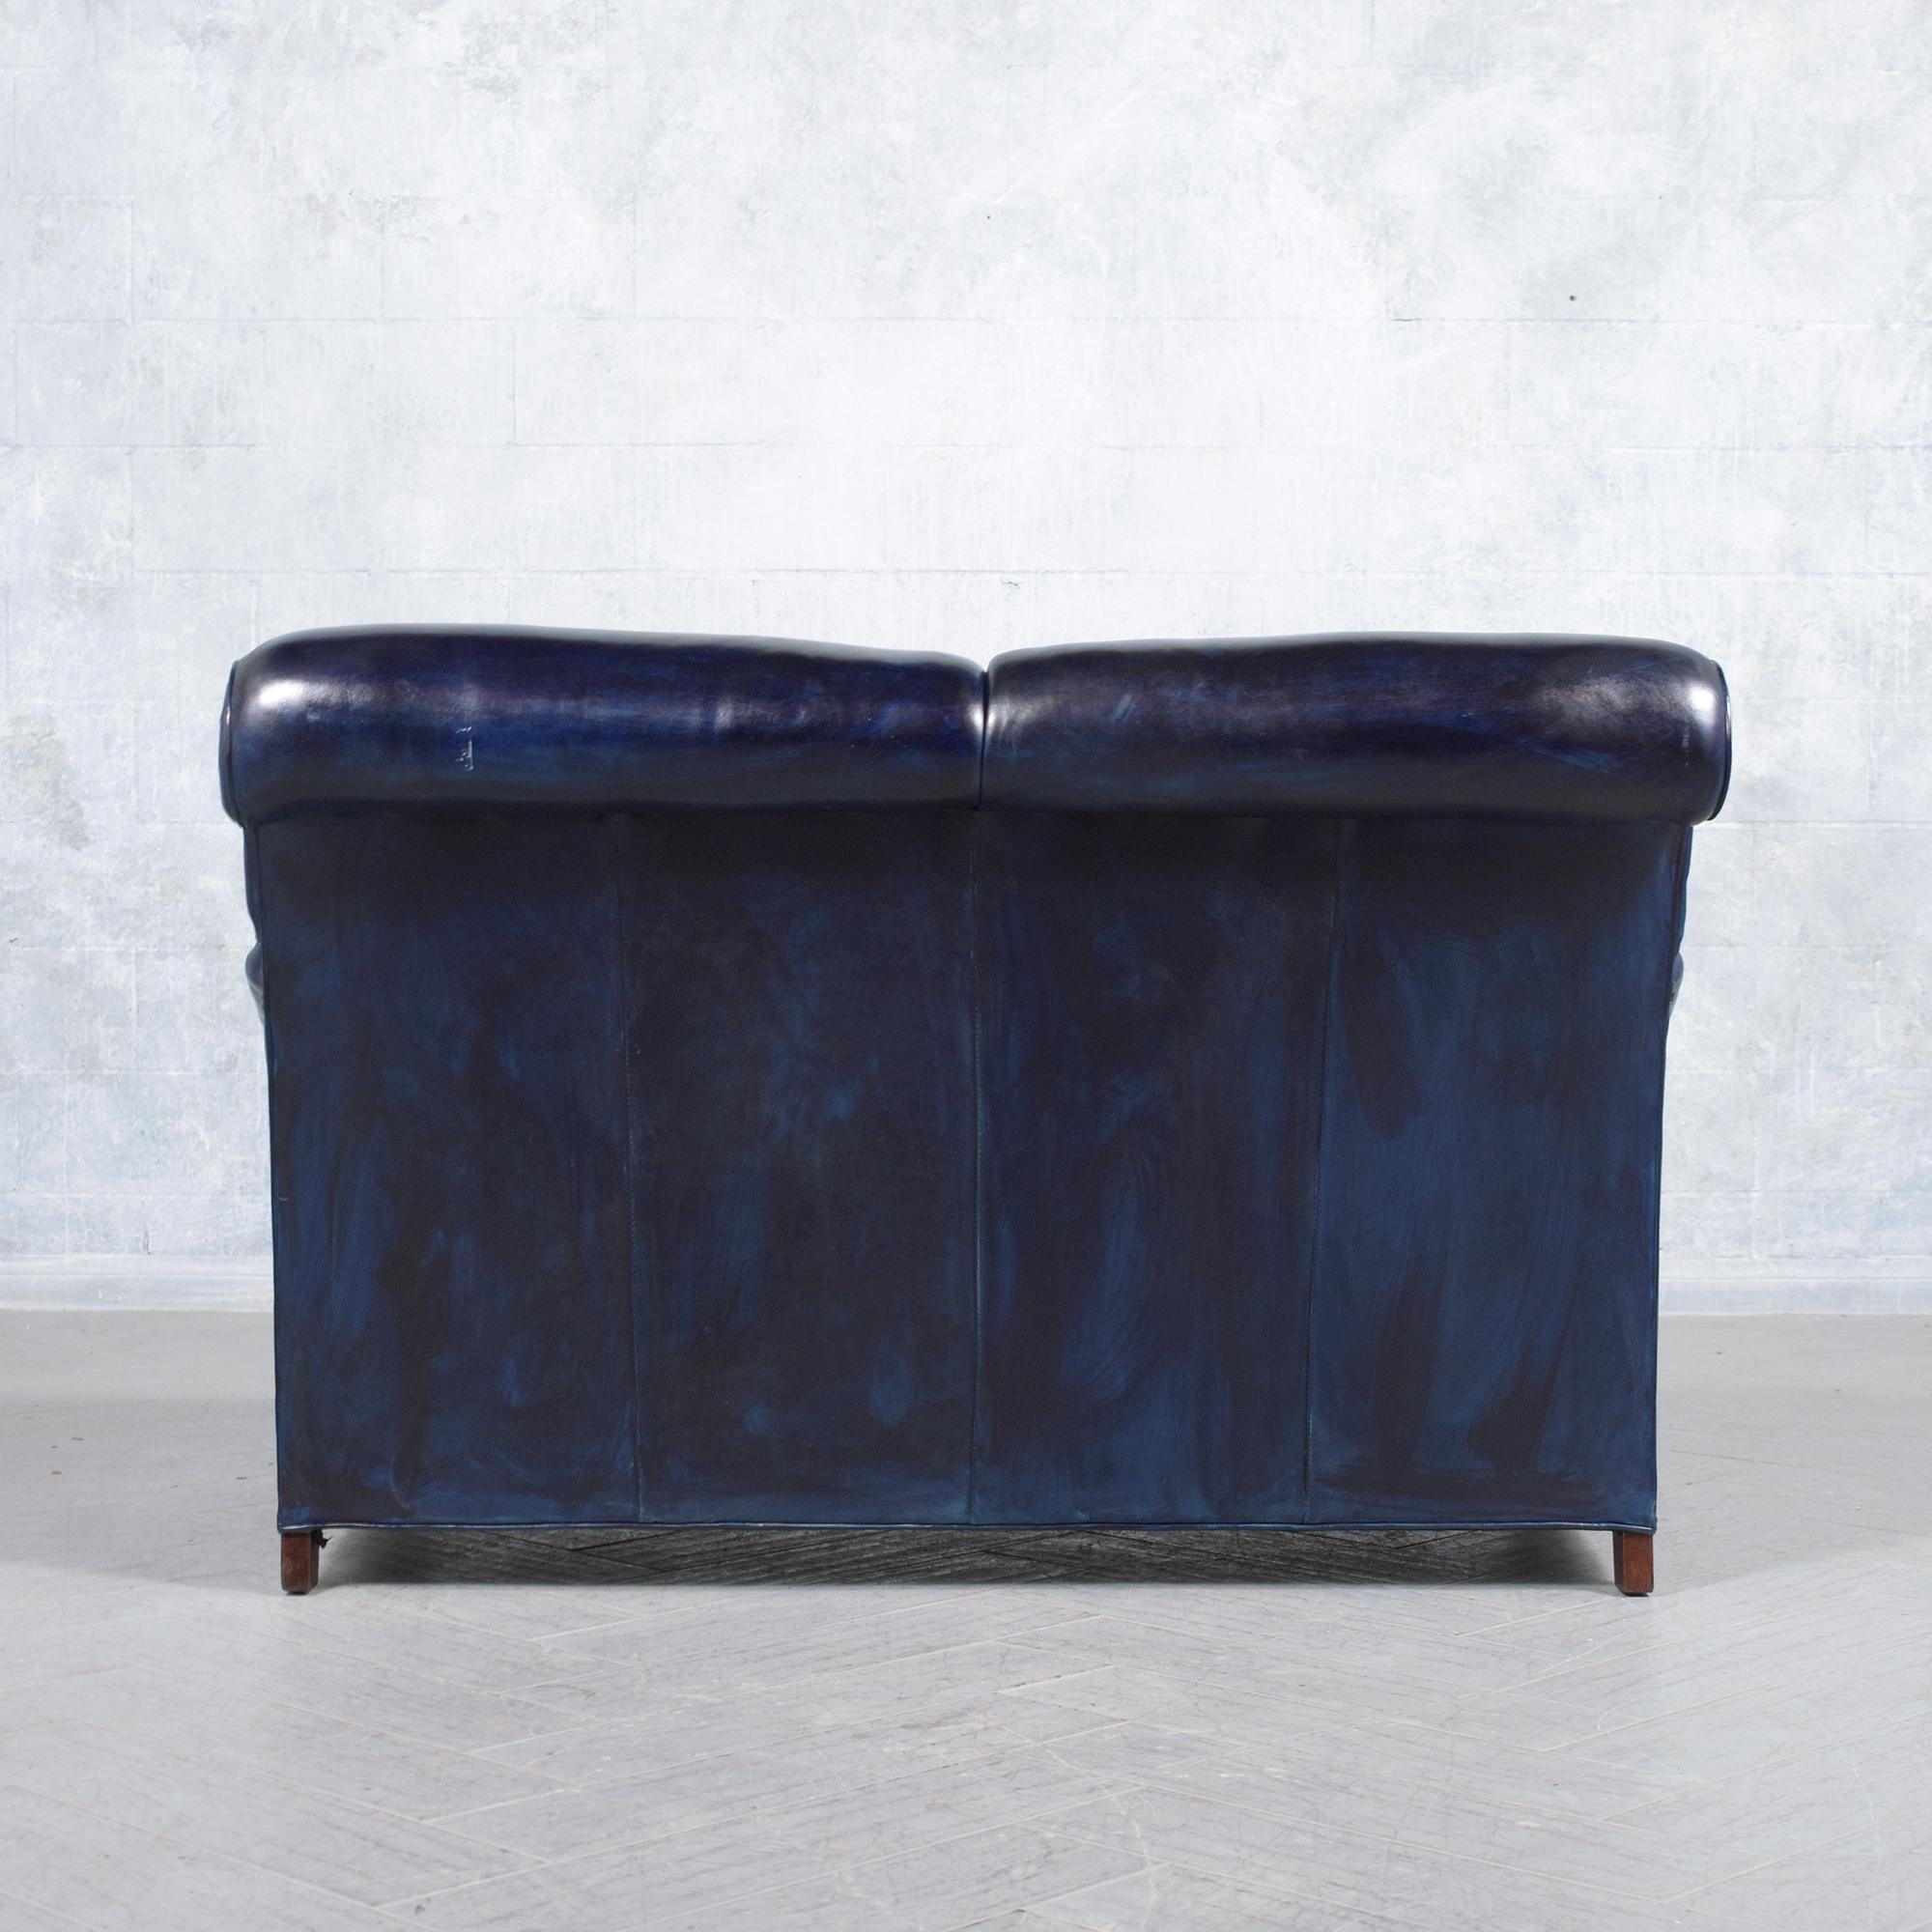 Hancock & Moore Loveseat: Classic English Elegance in Navy Blue Leather 6